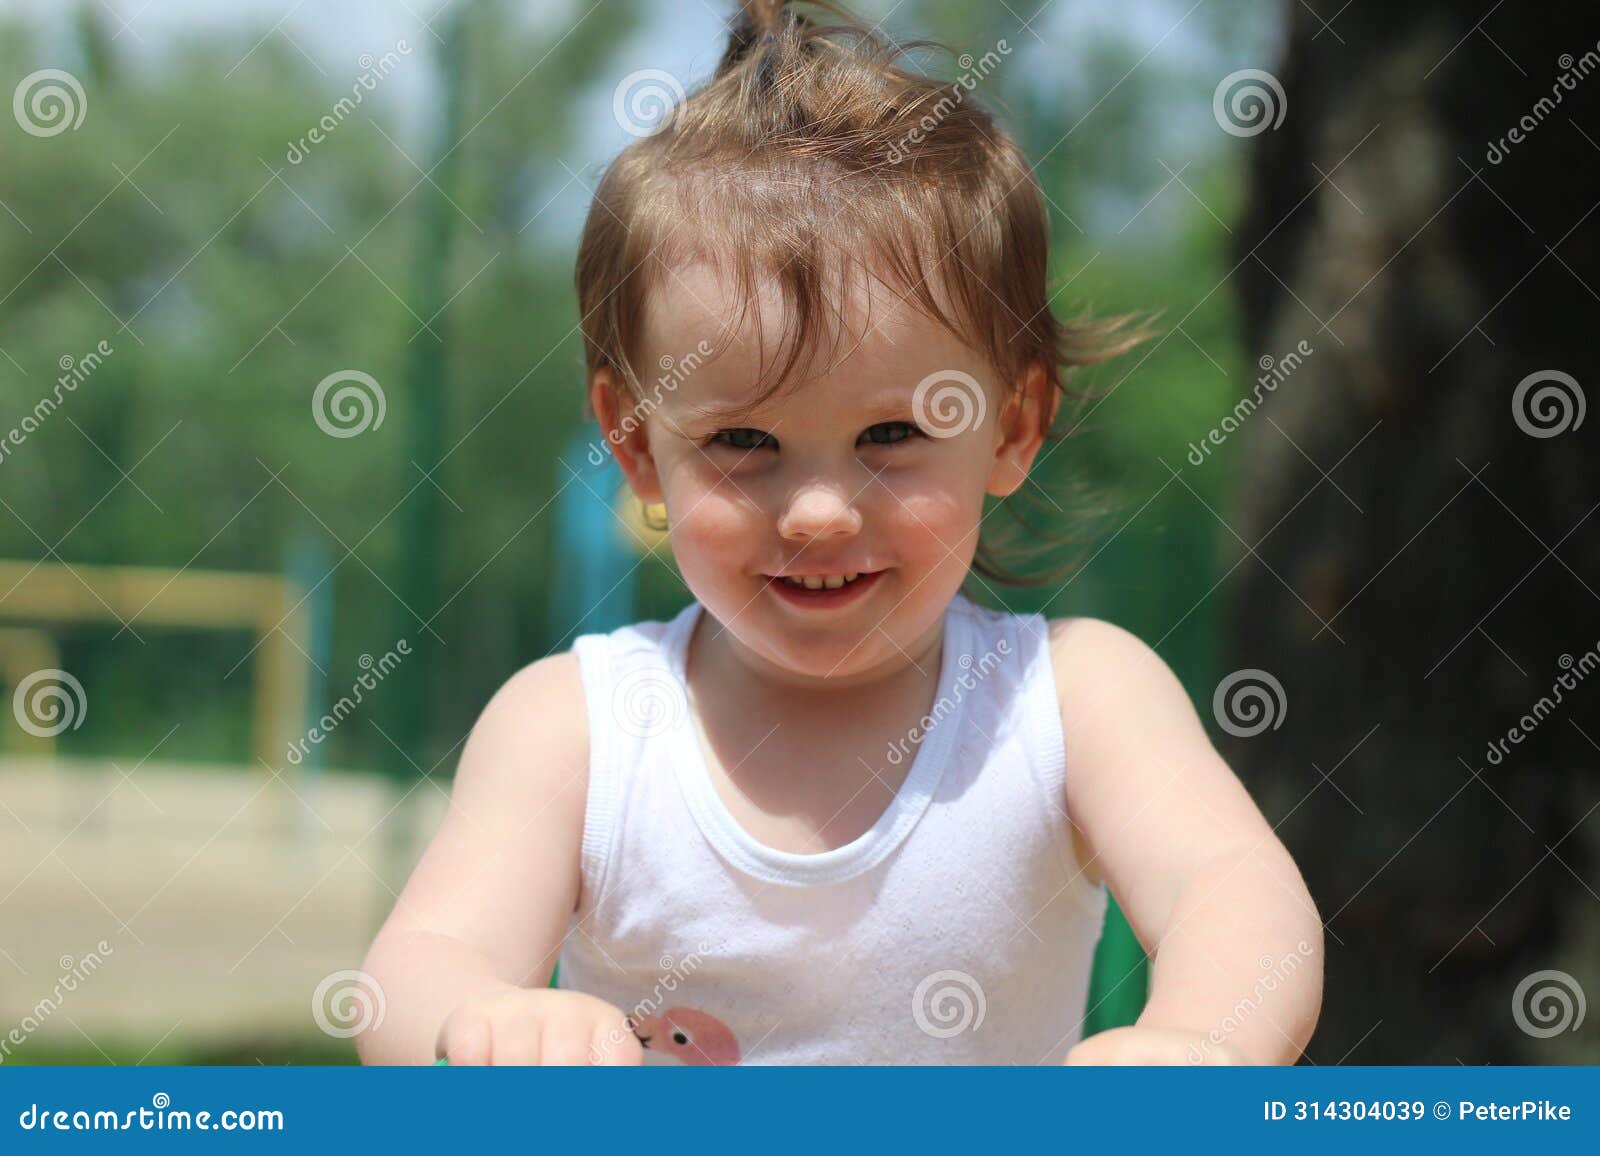 cheerful little child playing on the playground. exuberance and vitality of a child enjoying themselves. various activities and